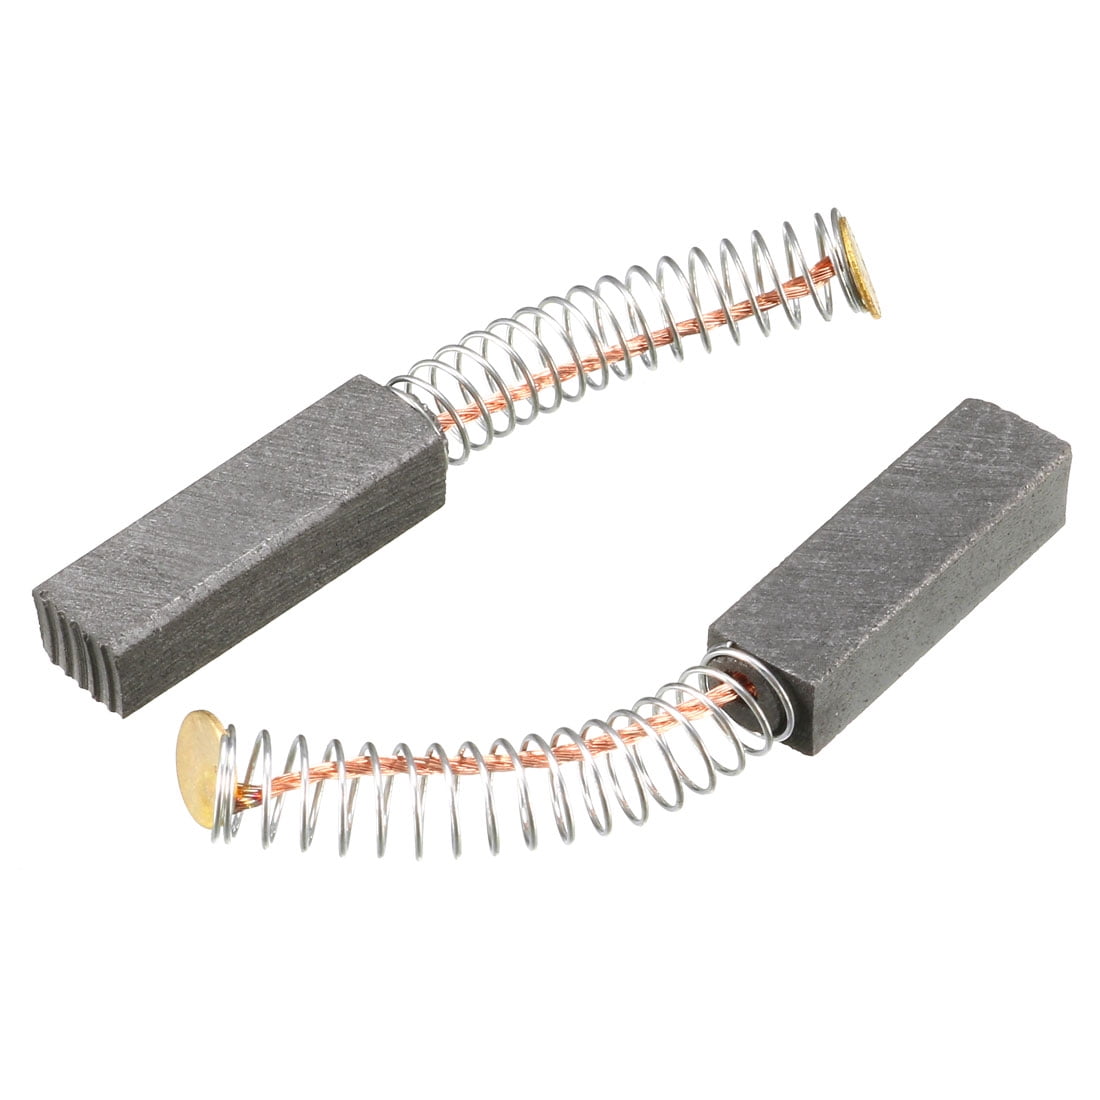 12mm x 6mm x 4mm Motor Carbon Brushes 40 Pcs for Generic Electric Motor ✦KD 